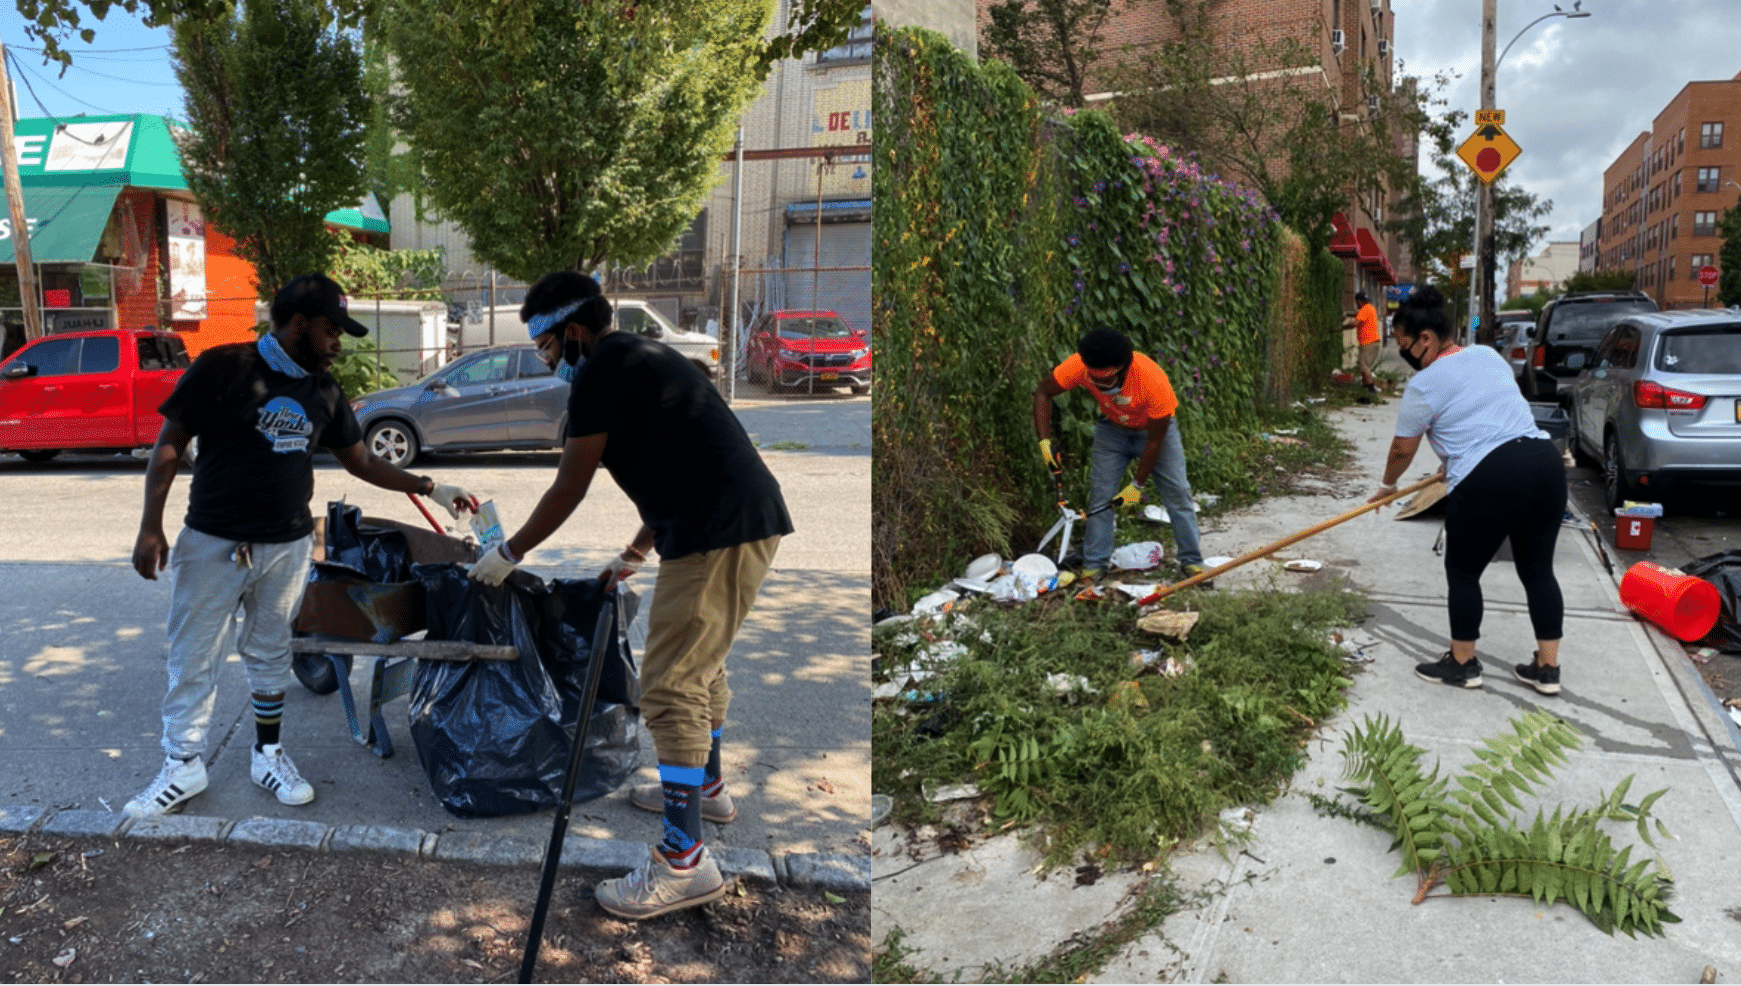 Photo on the left: Two men collect trash - one holds a bag while the other puts trash in the bag. Men are outside on pavement next to some dirt. Photo on the right - a man and a woman work to clean up a debris-filled grassy section between a sidewalk and a fence beside a NYC street.